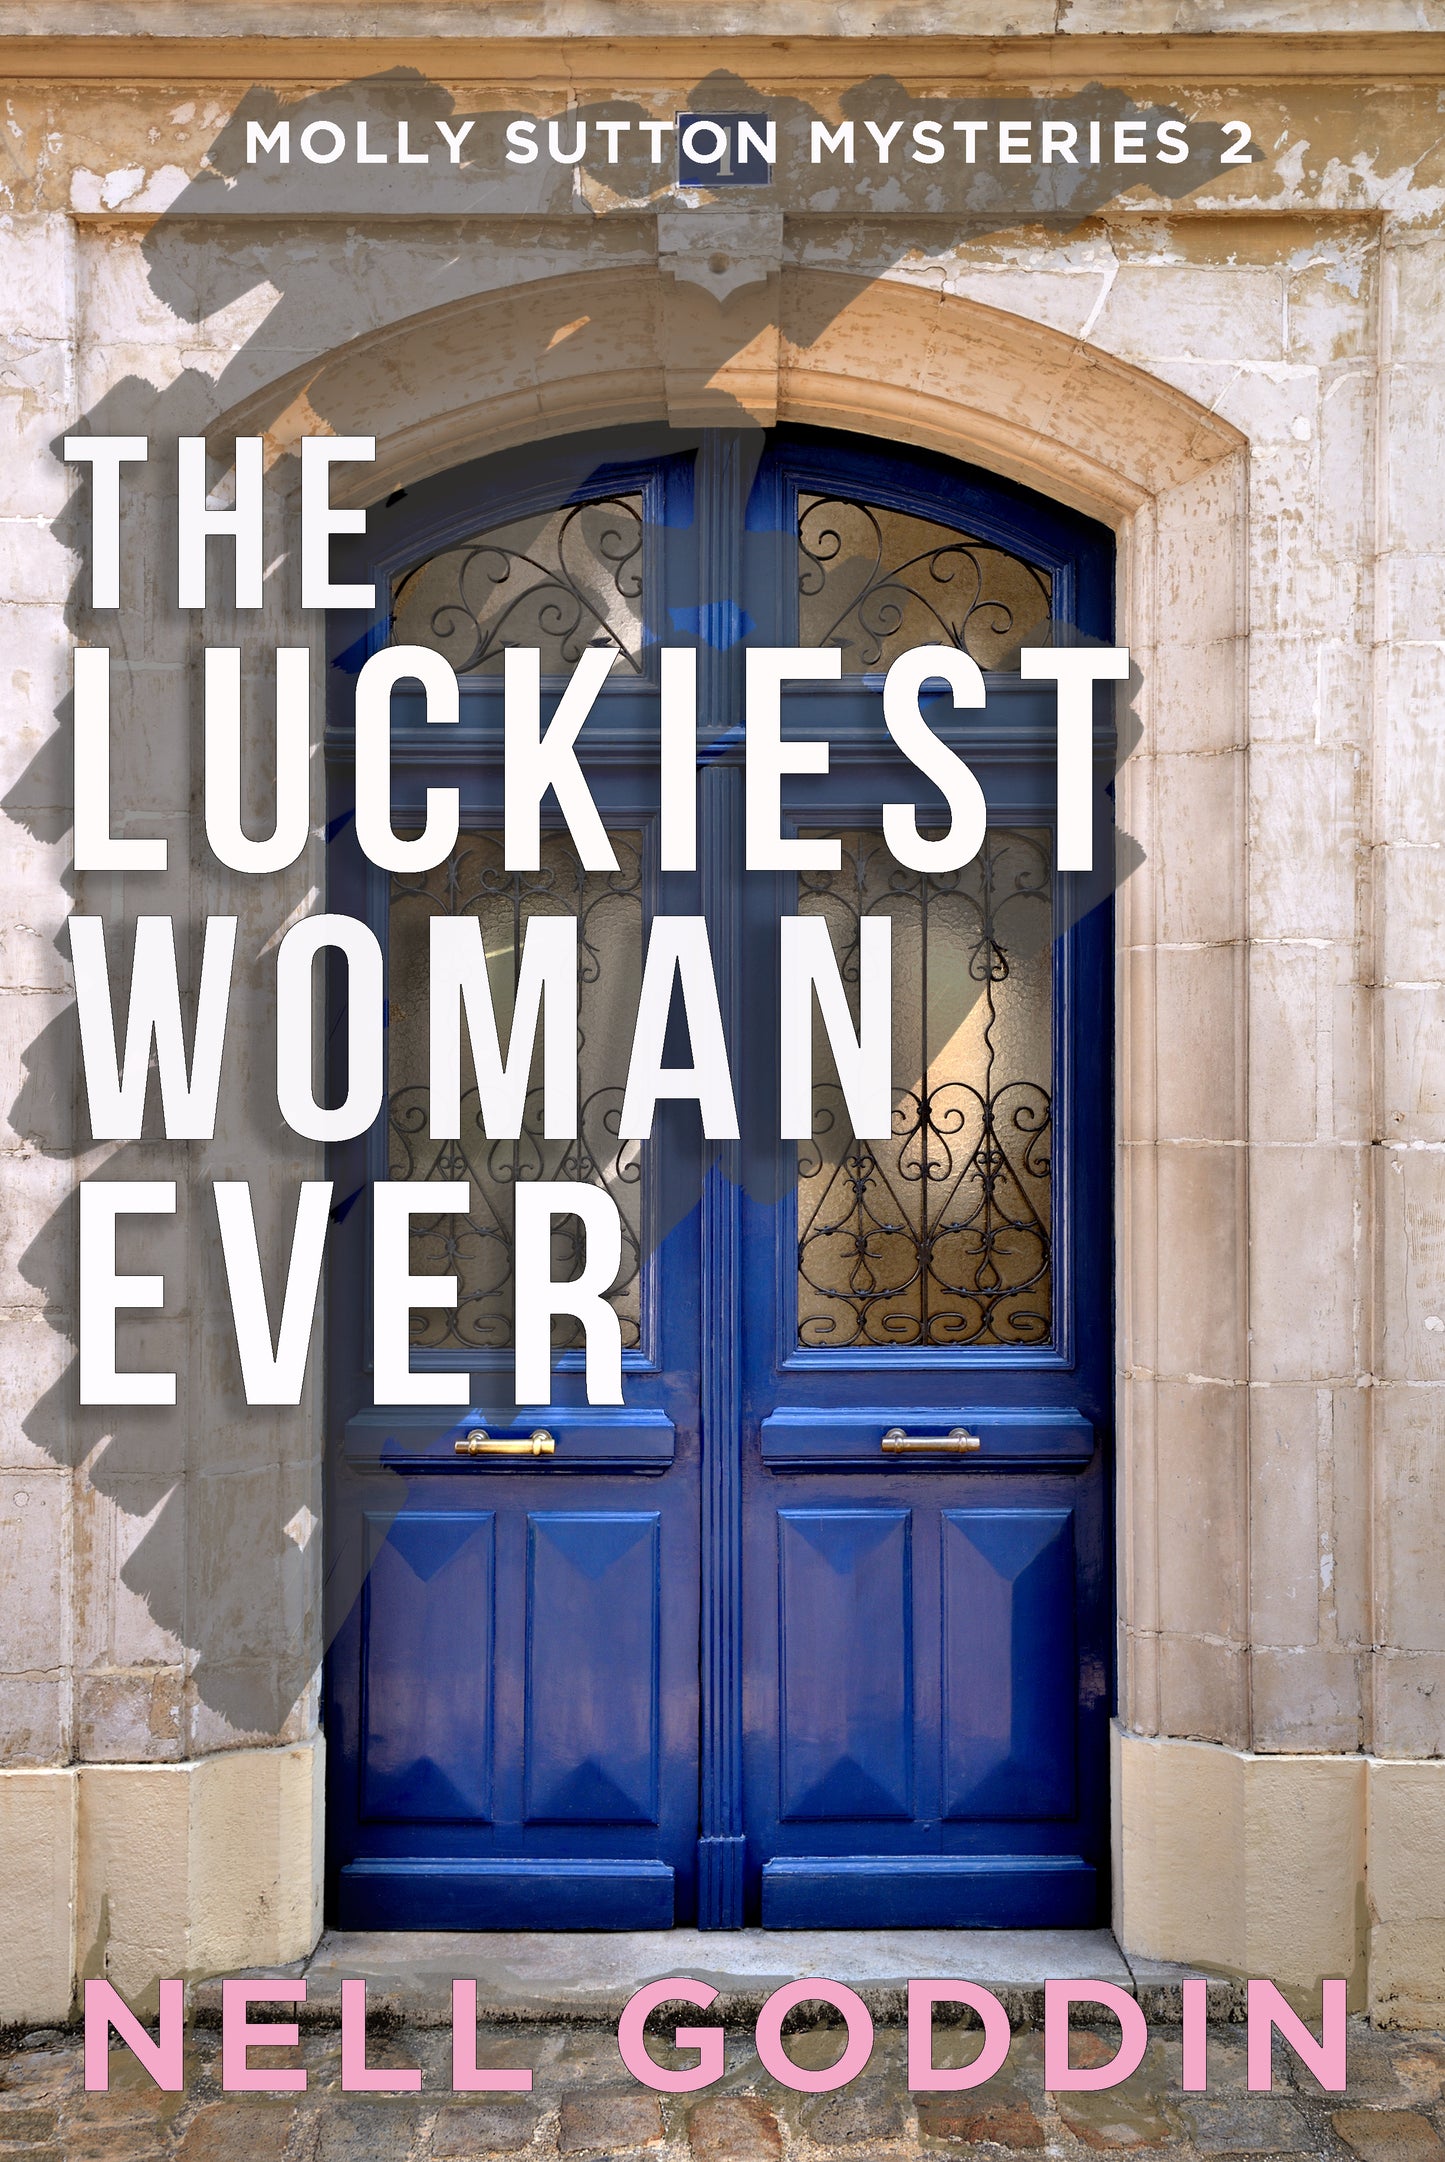 The Luckiest Woman Ever (Molly Sutton Mysteries 2)